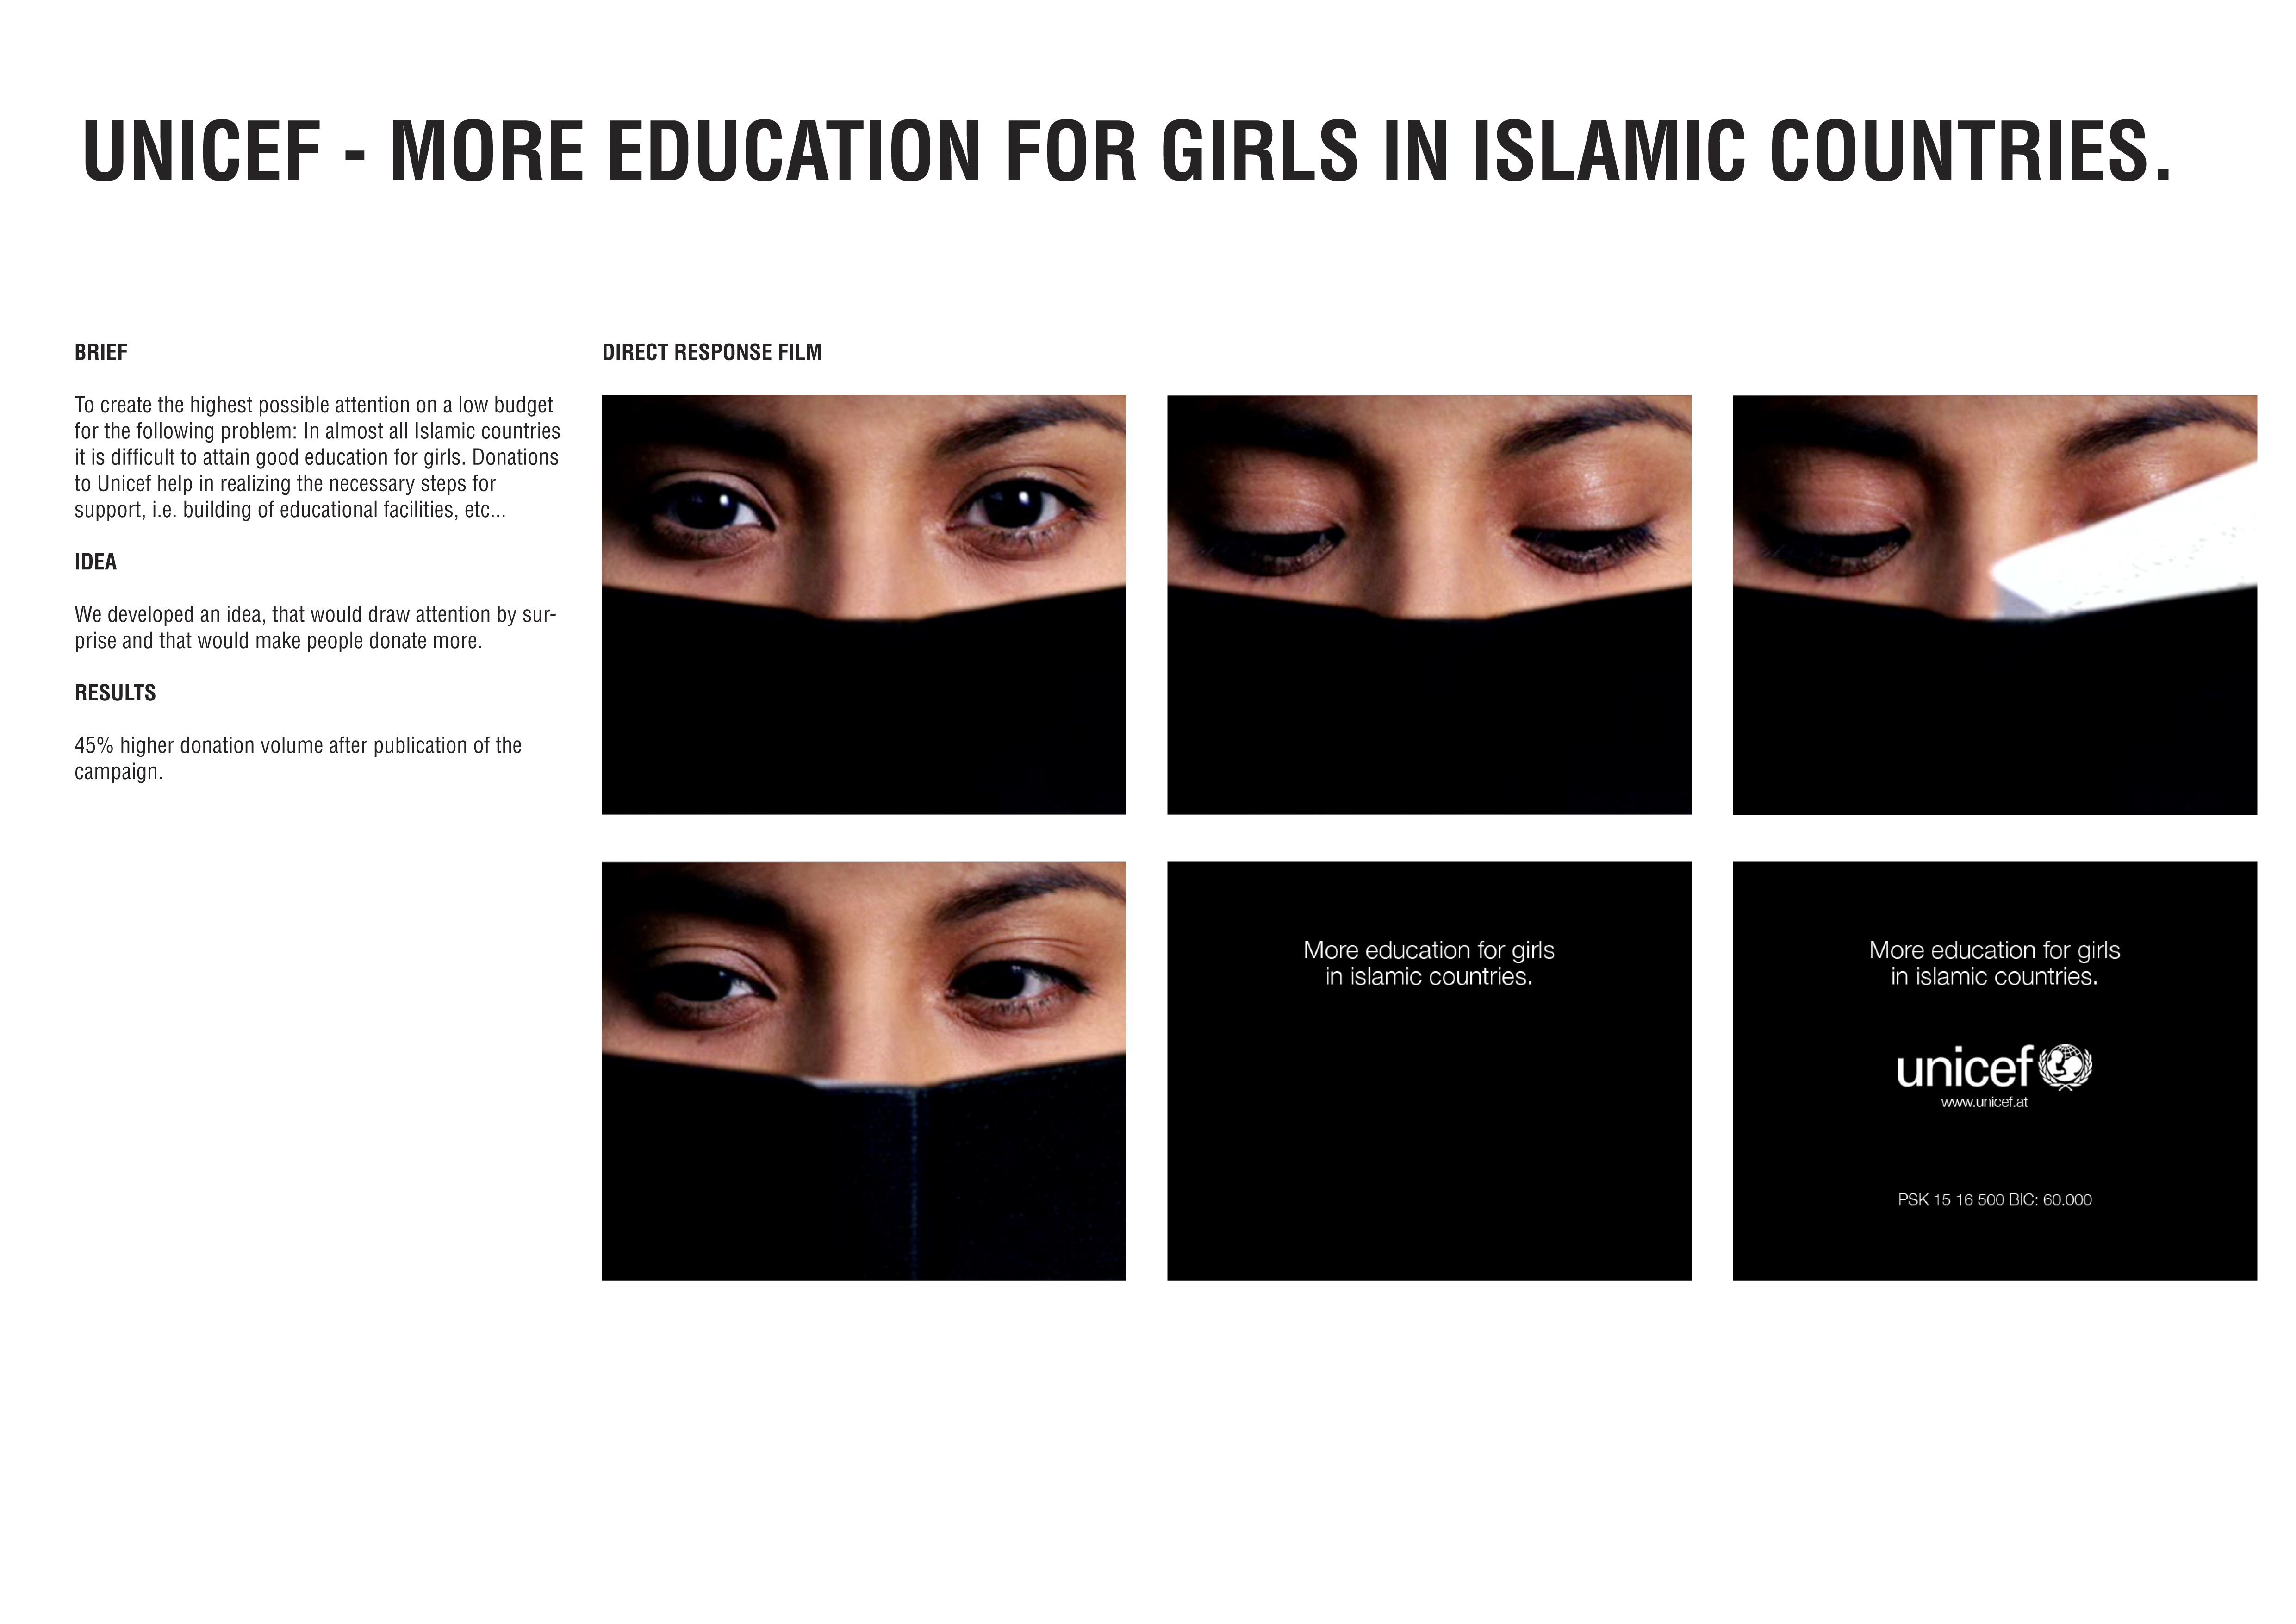 EDUCATION FOR GIRLS IN ISLAMIC COUNTRIES